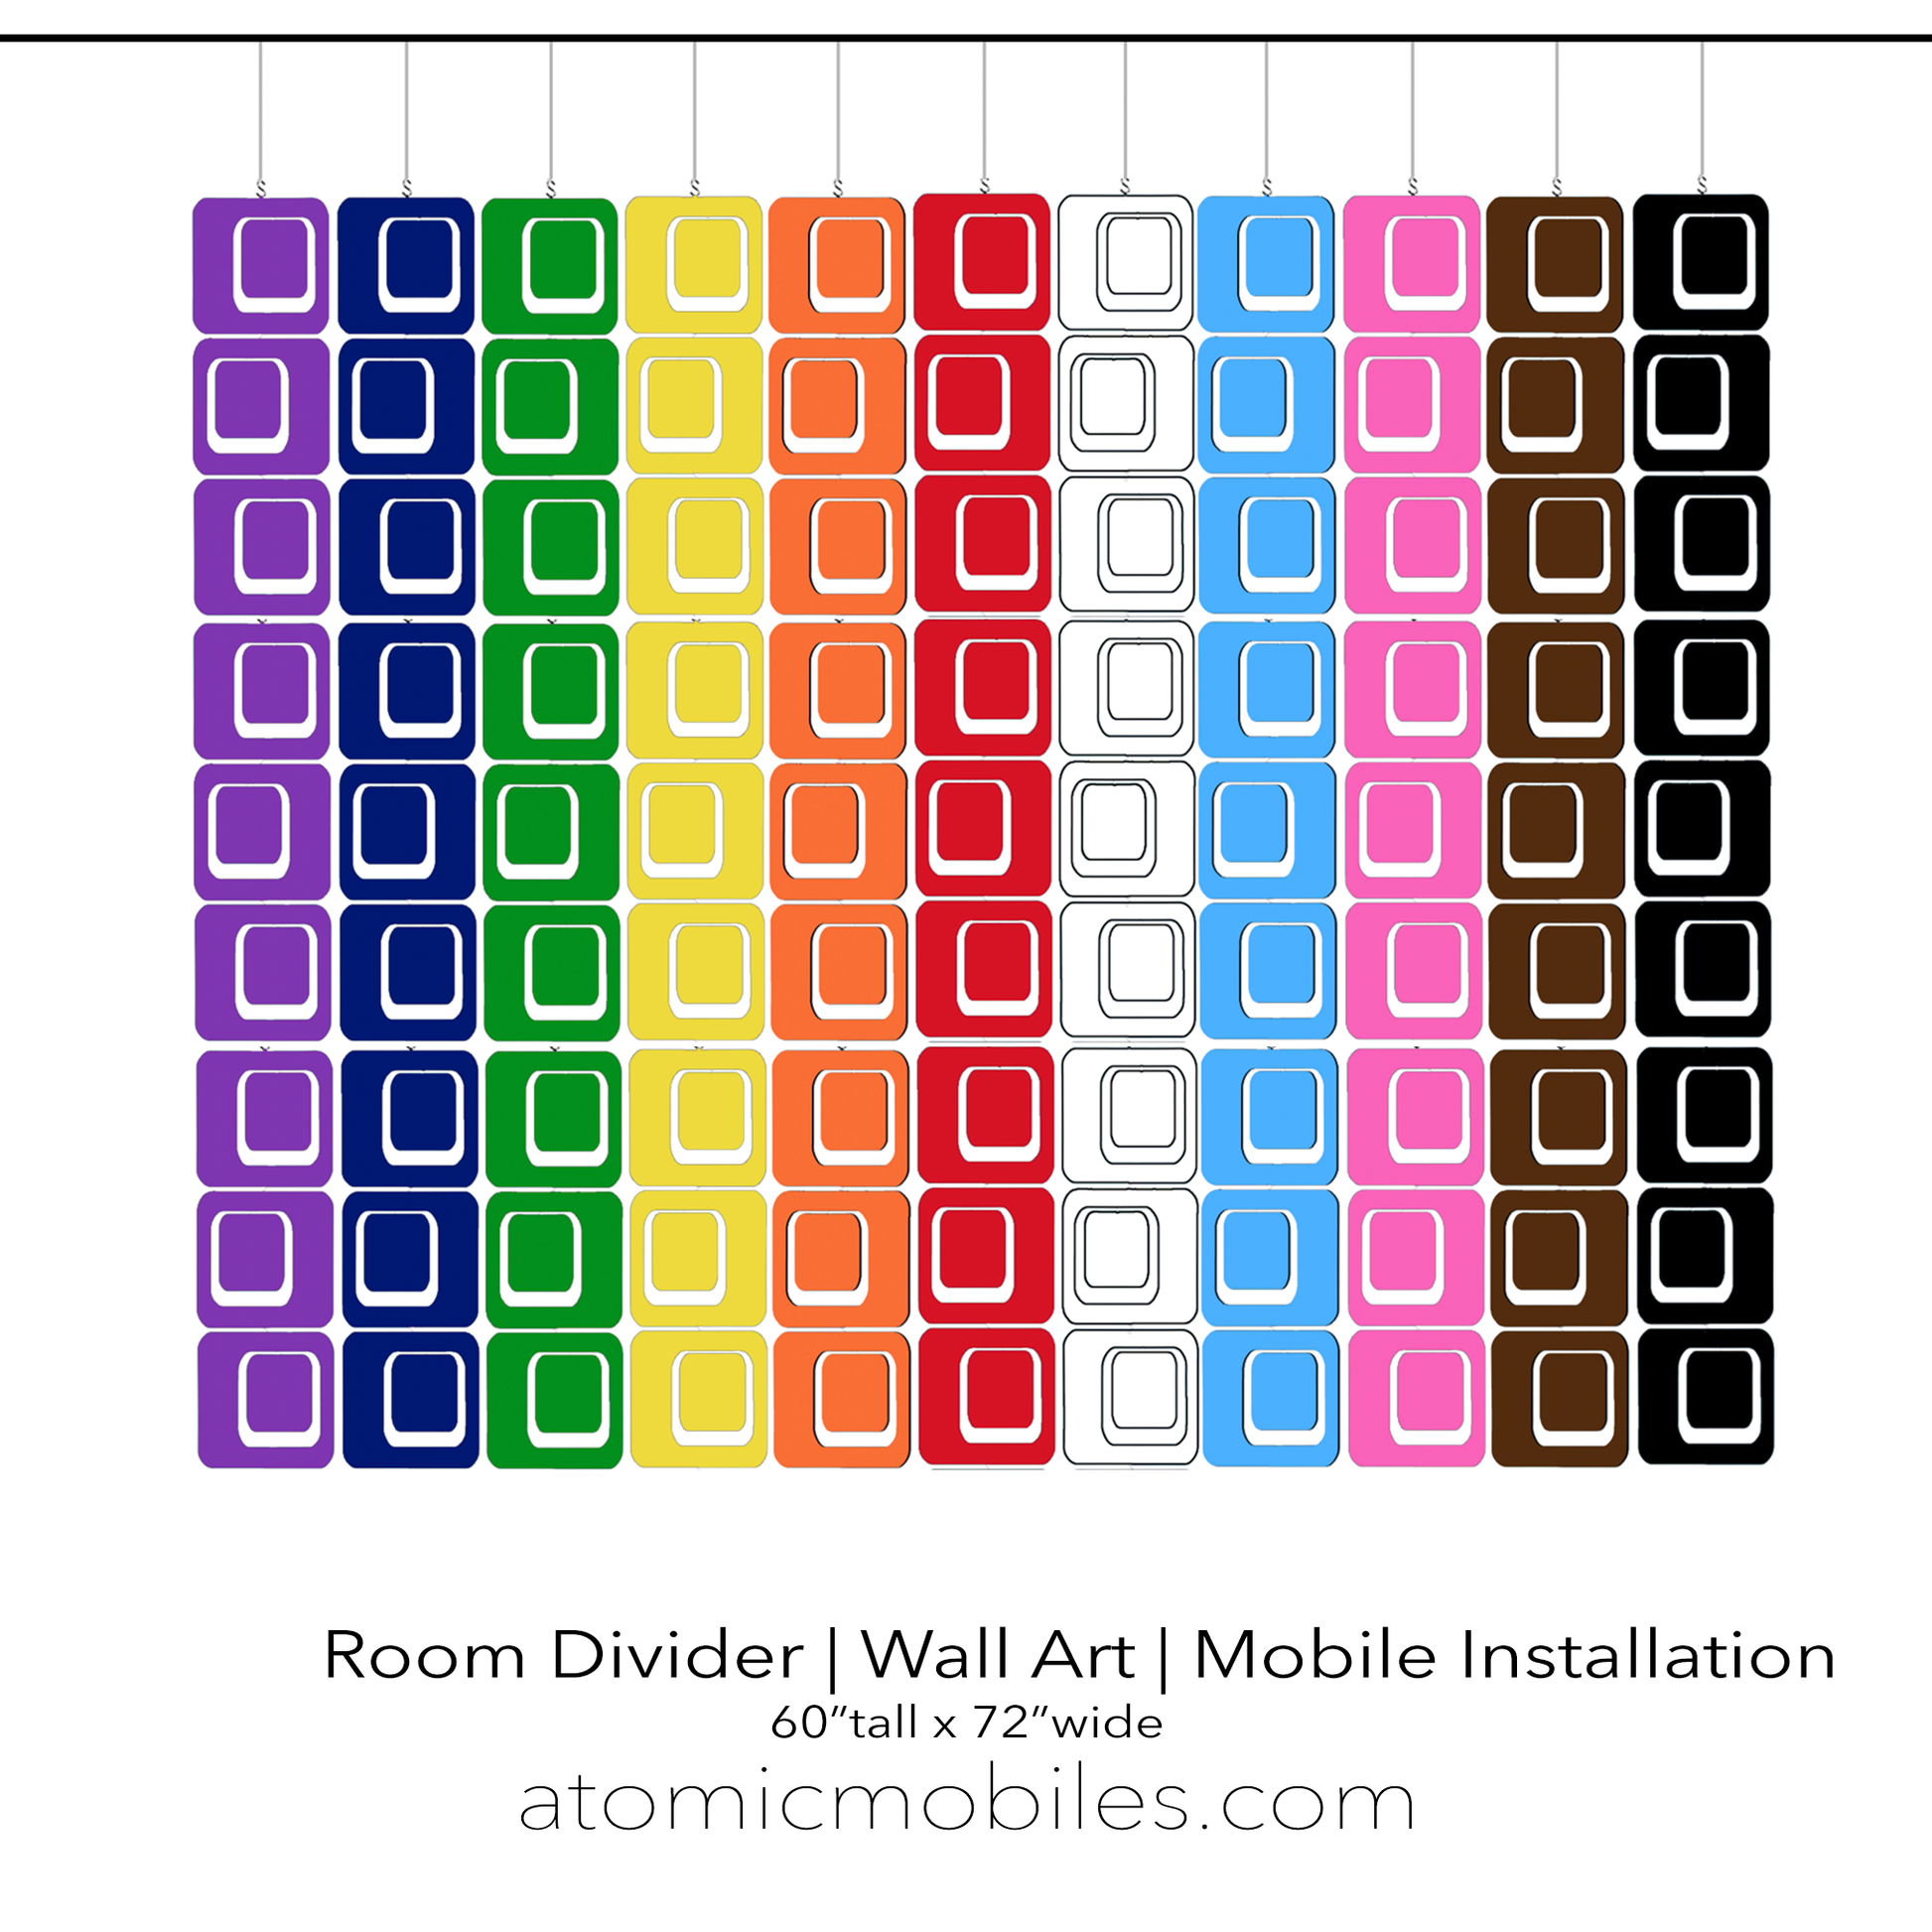 LGBTQ+ Unity Curtain, Wall Art, Mobile Installation, Room Divider 60"x72" by AtomicMobiles.com - LOVE IS LOVE